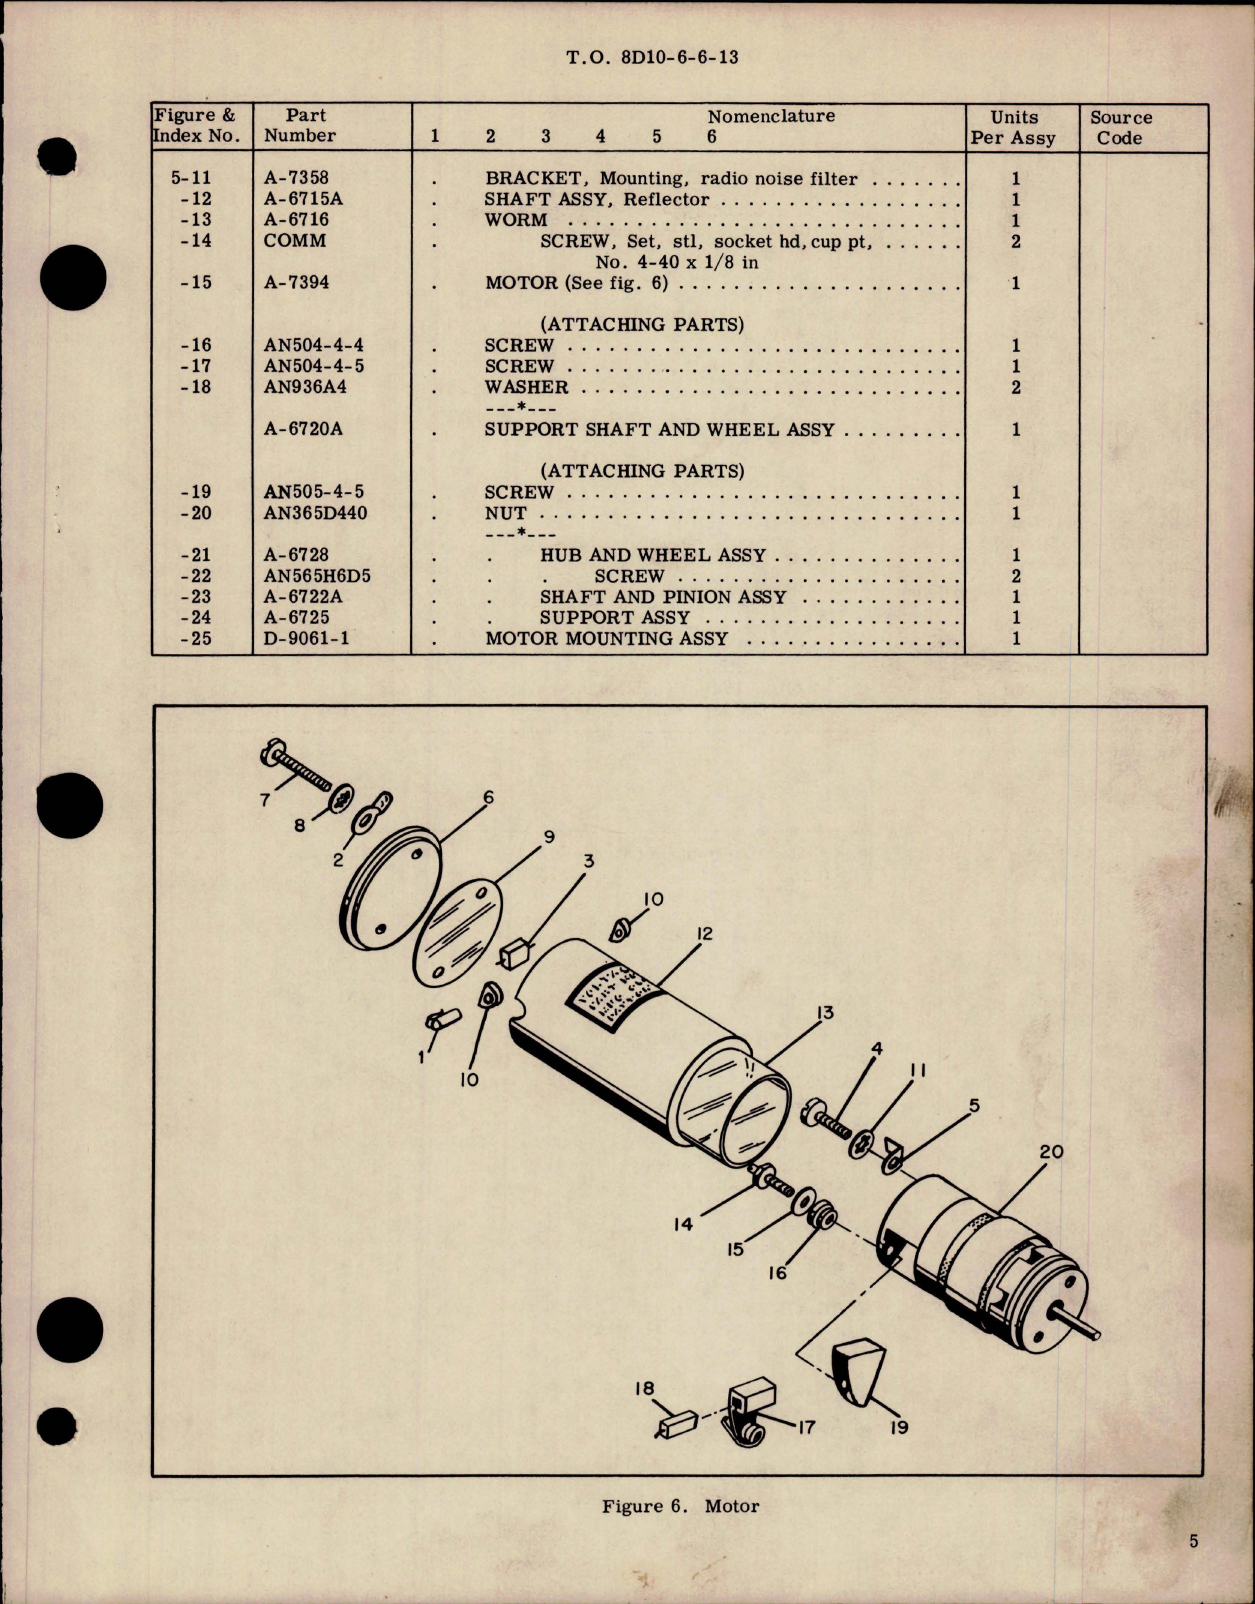 Sample page 5 from AirCorps Library document: Overhaul Instructions with Parts for Rotating Warning Navigational Light - Part G-6965-13